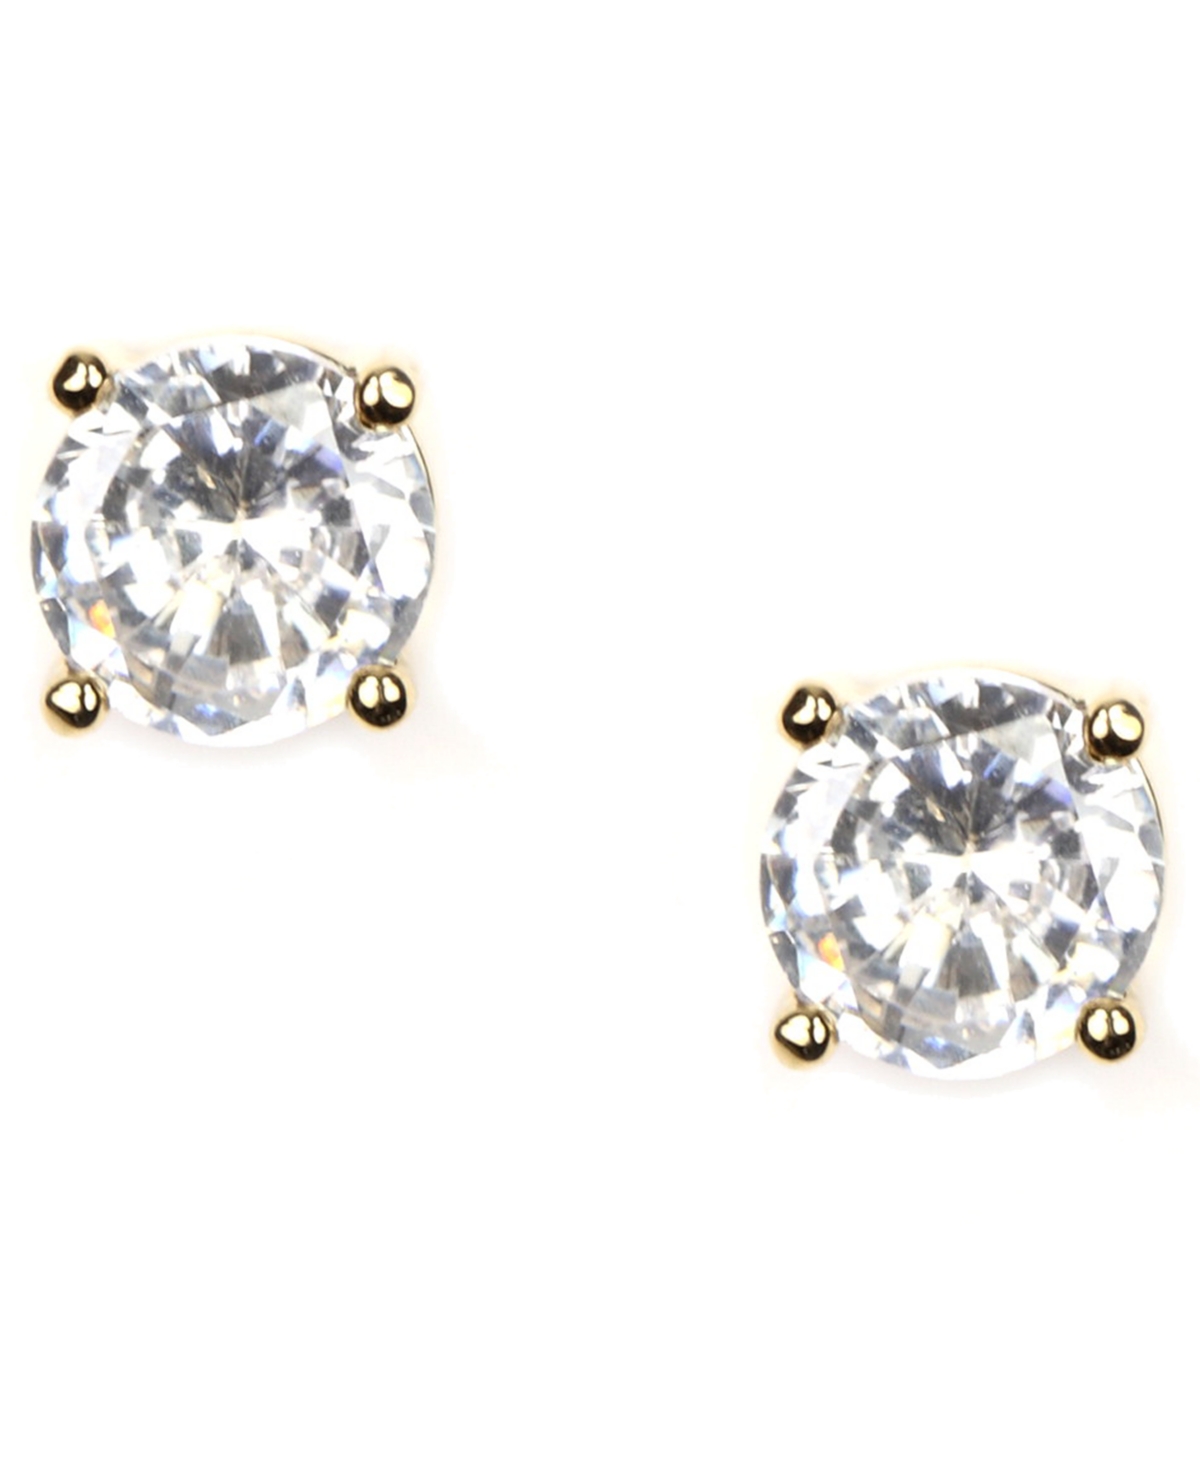 Shop Givenchy Cz Earrings Crystal Stud Earrings In Gold-tone